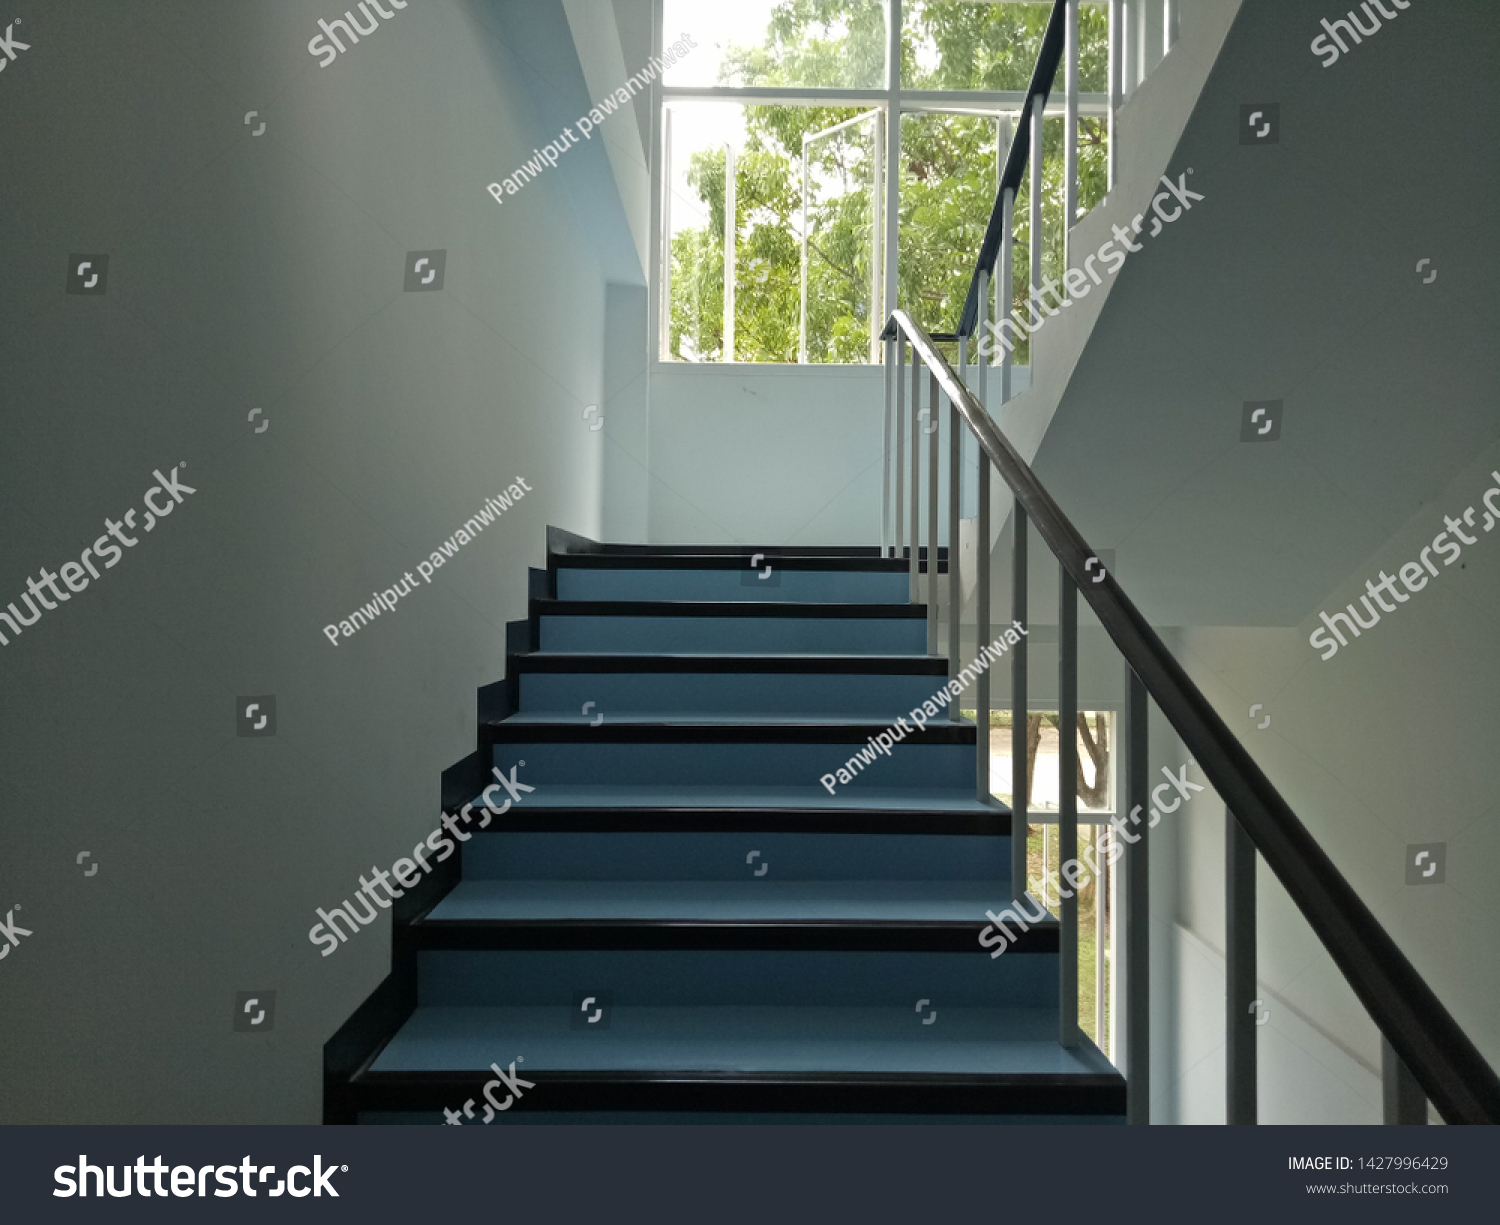 Walkway.Blue stairs.Narrow stairs.Walls and stairs.Stairs inside the building #1427996429